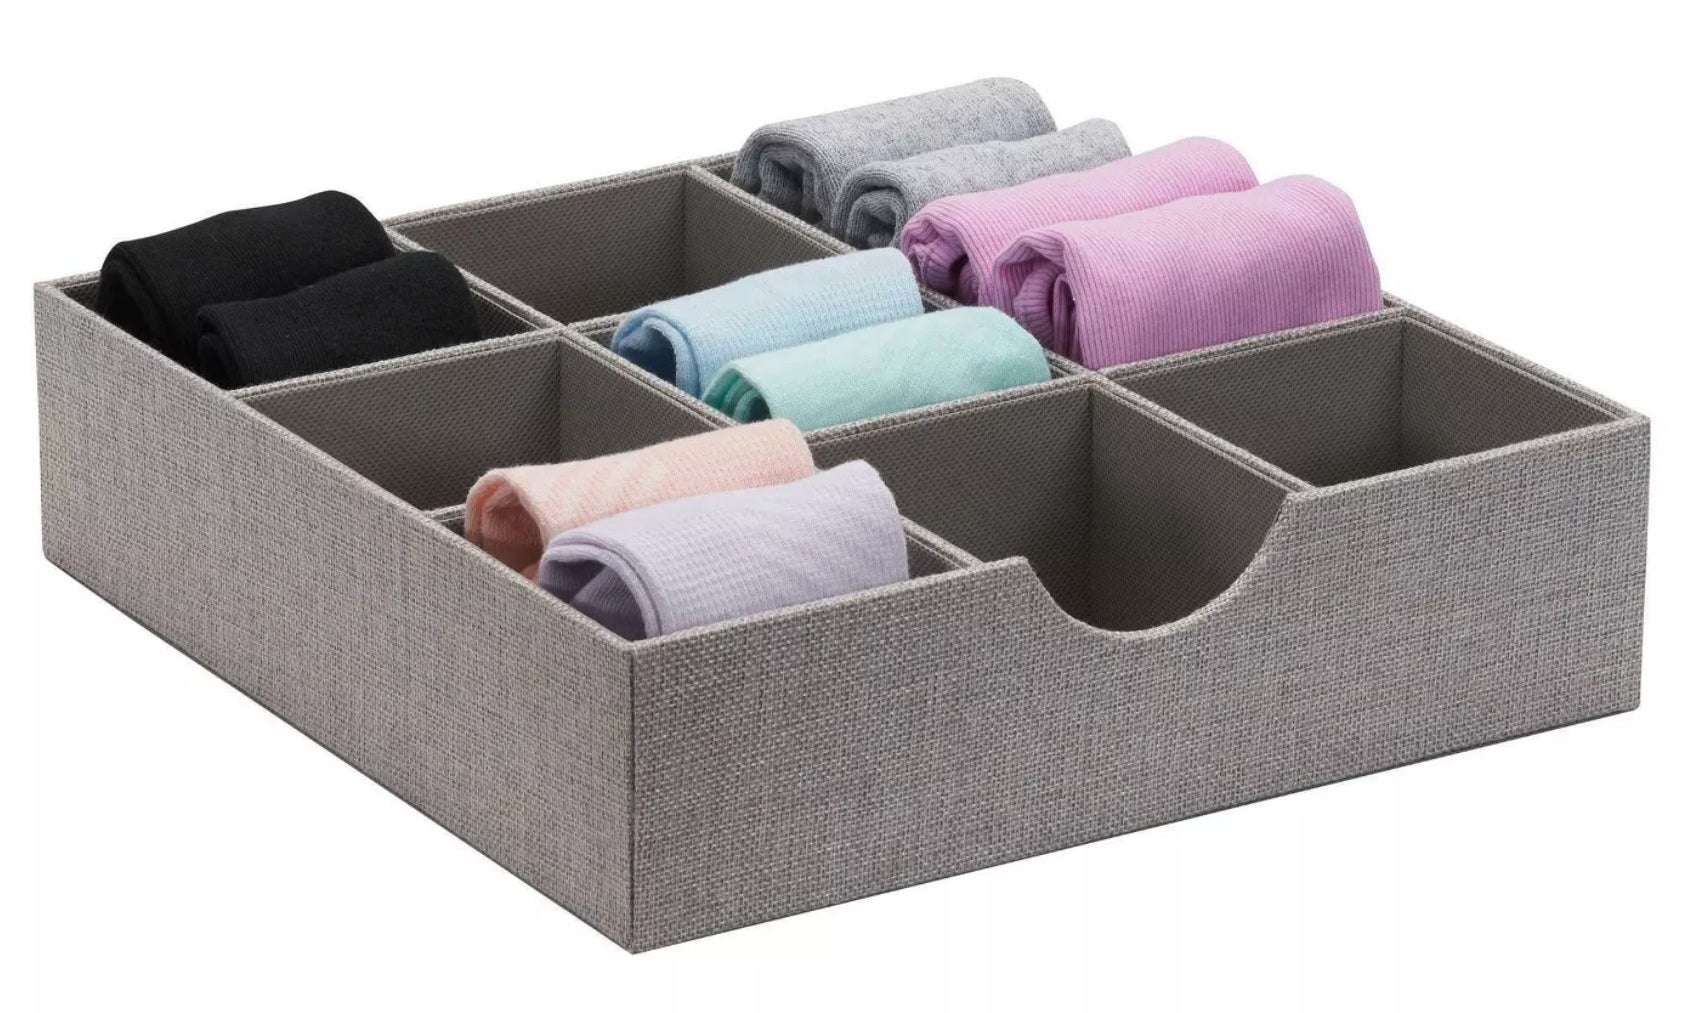 A gray tray divided into nine cubes, five of which are each holding two pairs of socks.